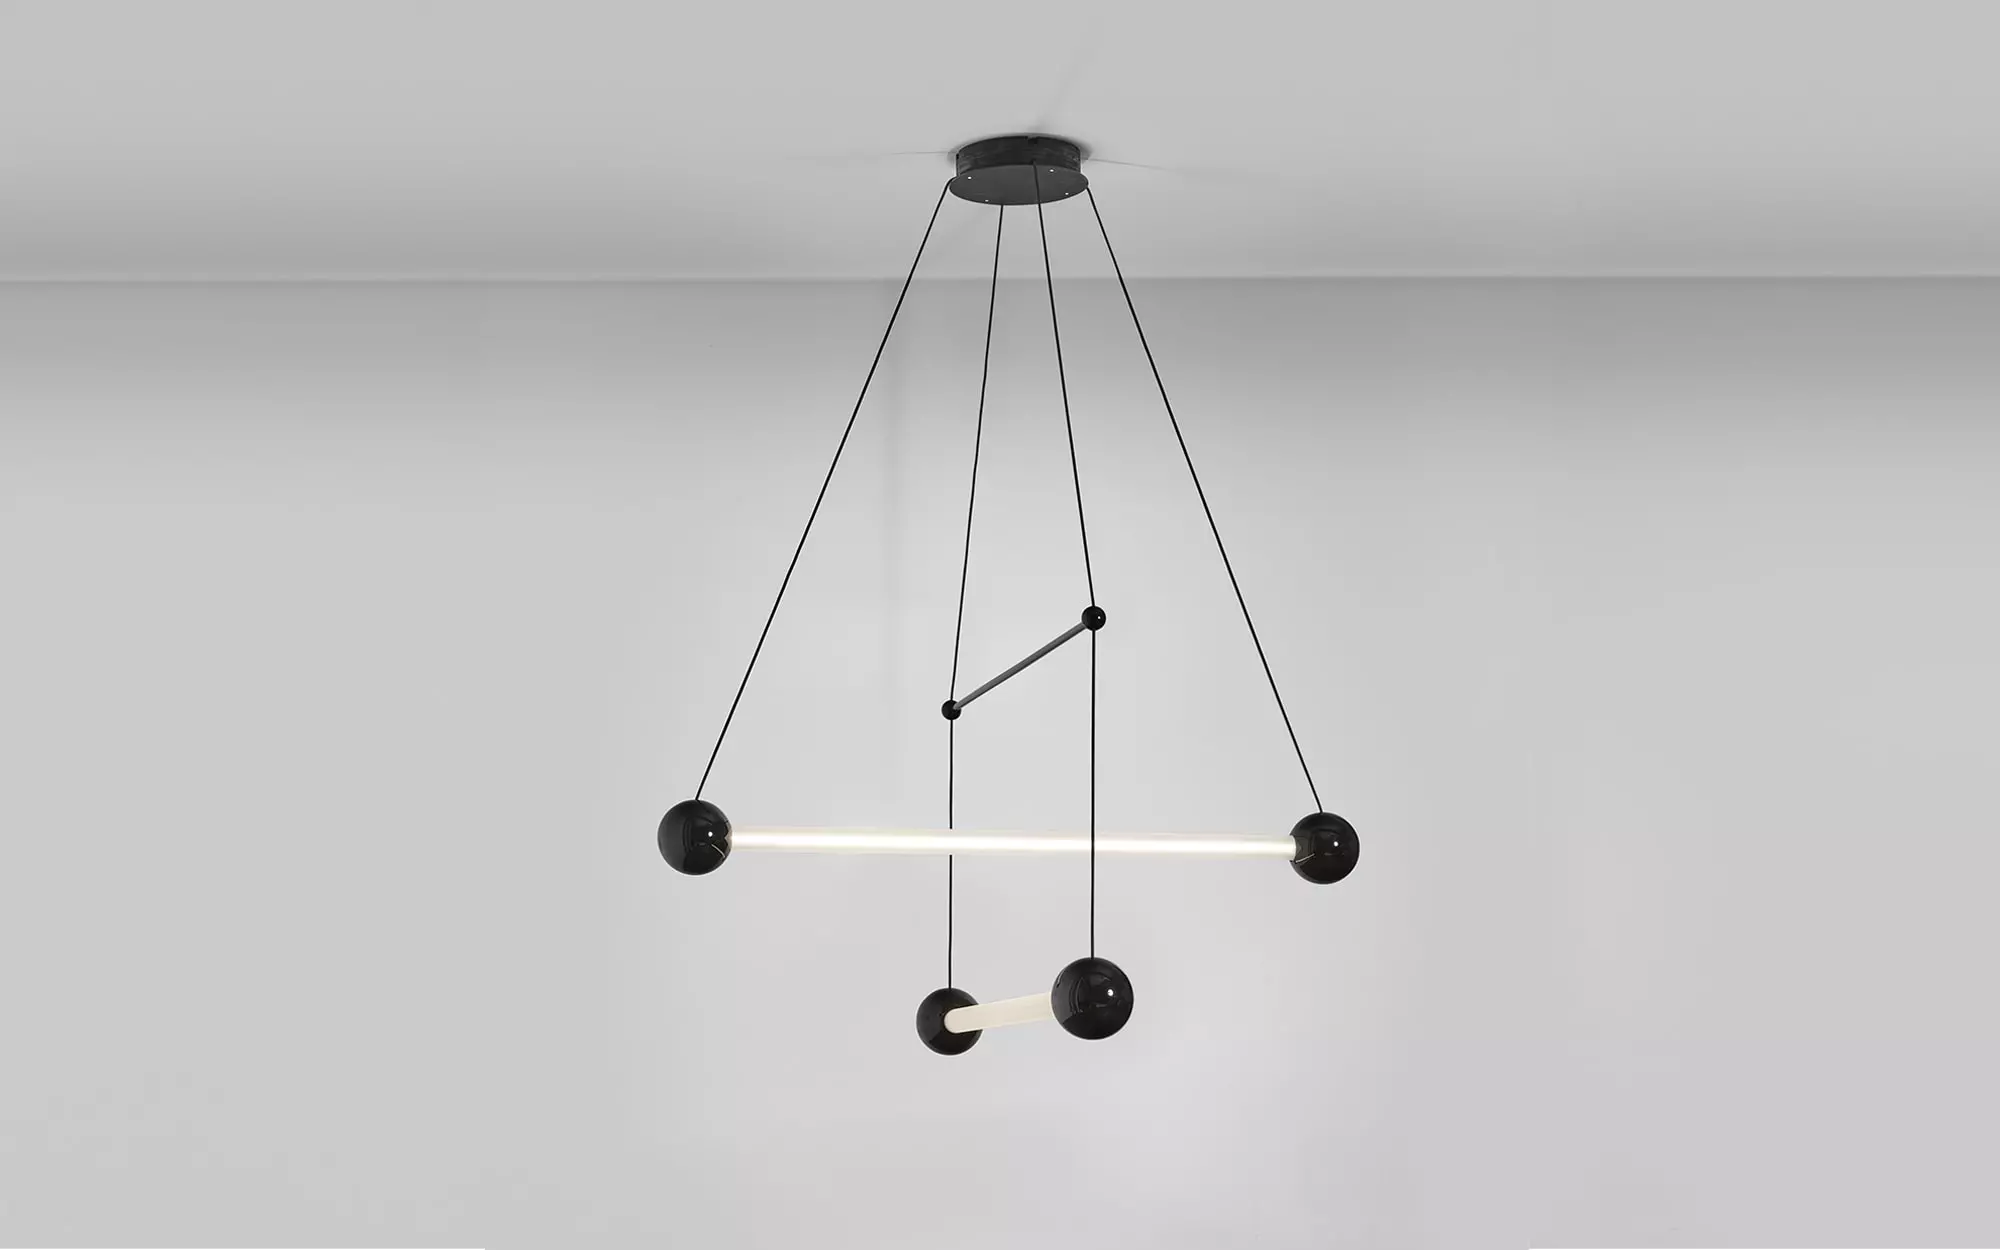 Trapeze 2 Ceiling light - Pierre Charpin - Seating - Galerie kreo